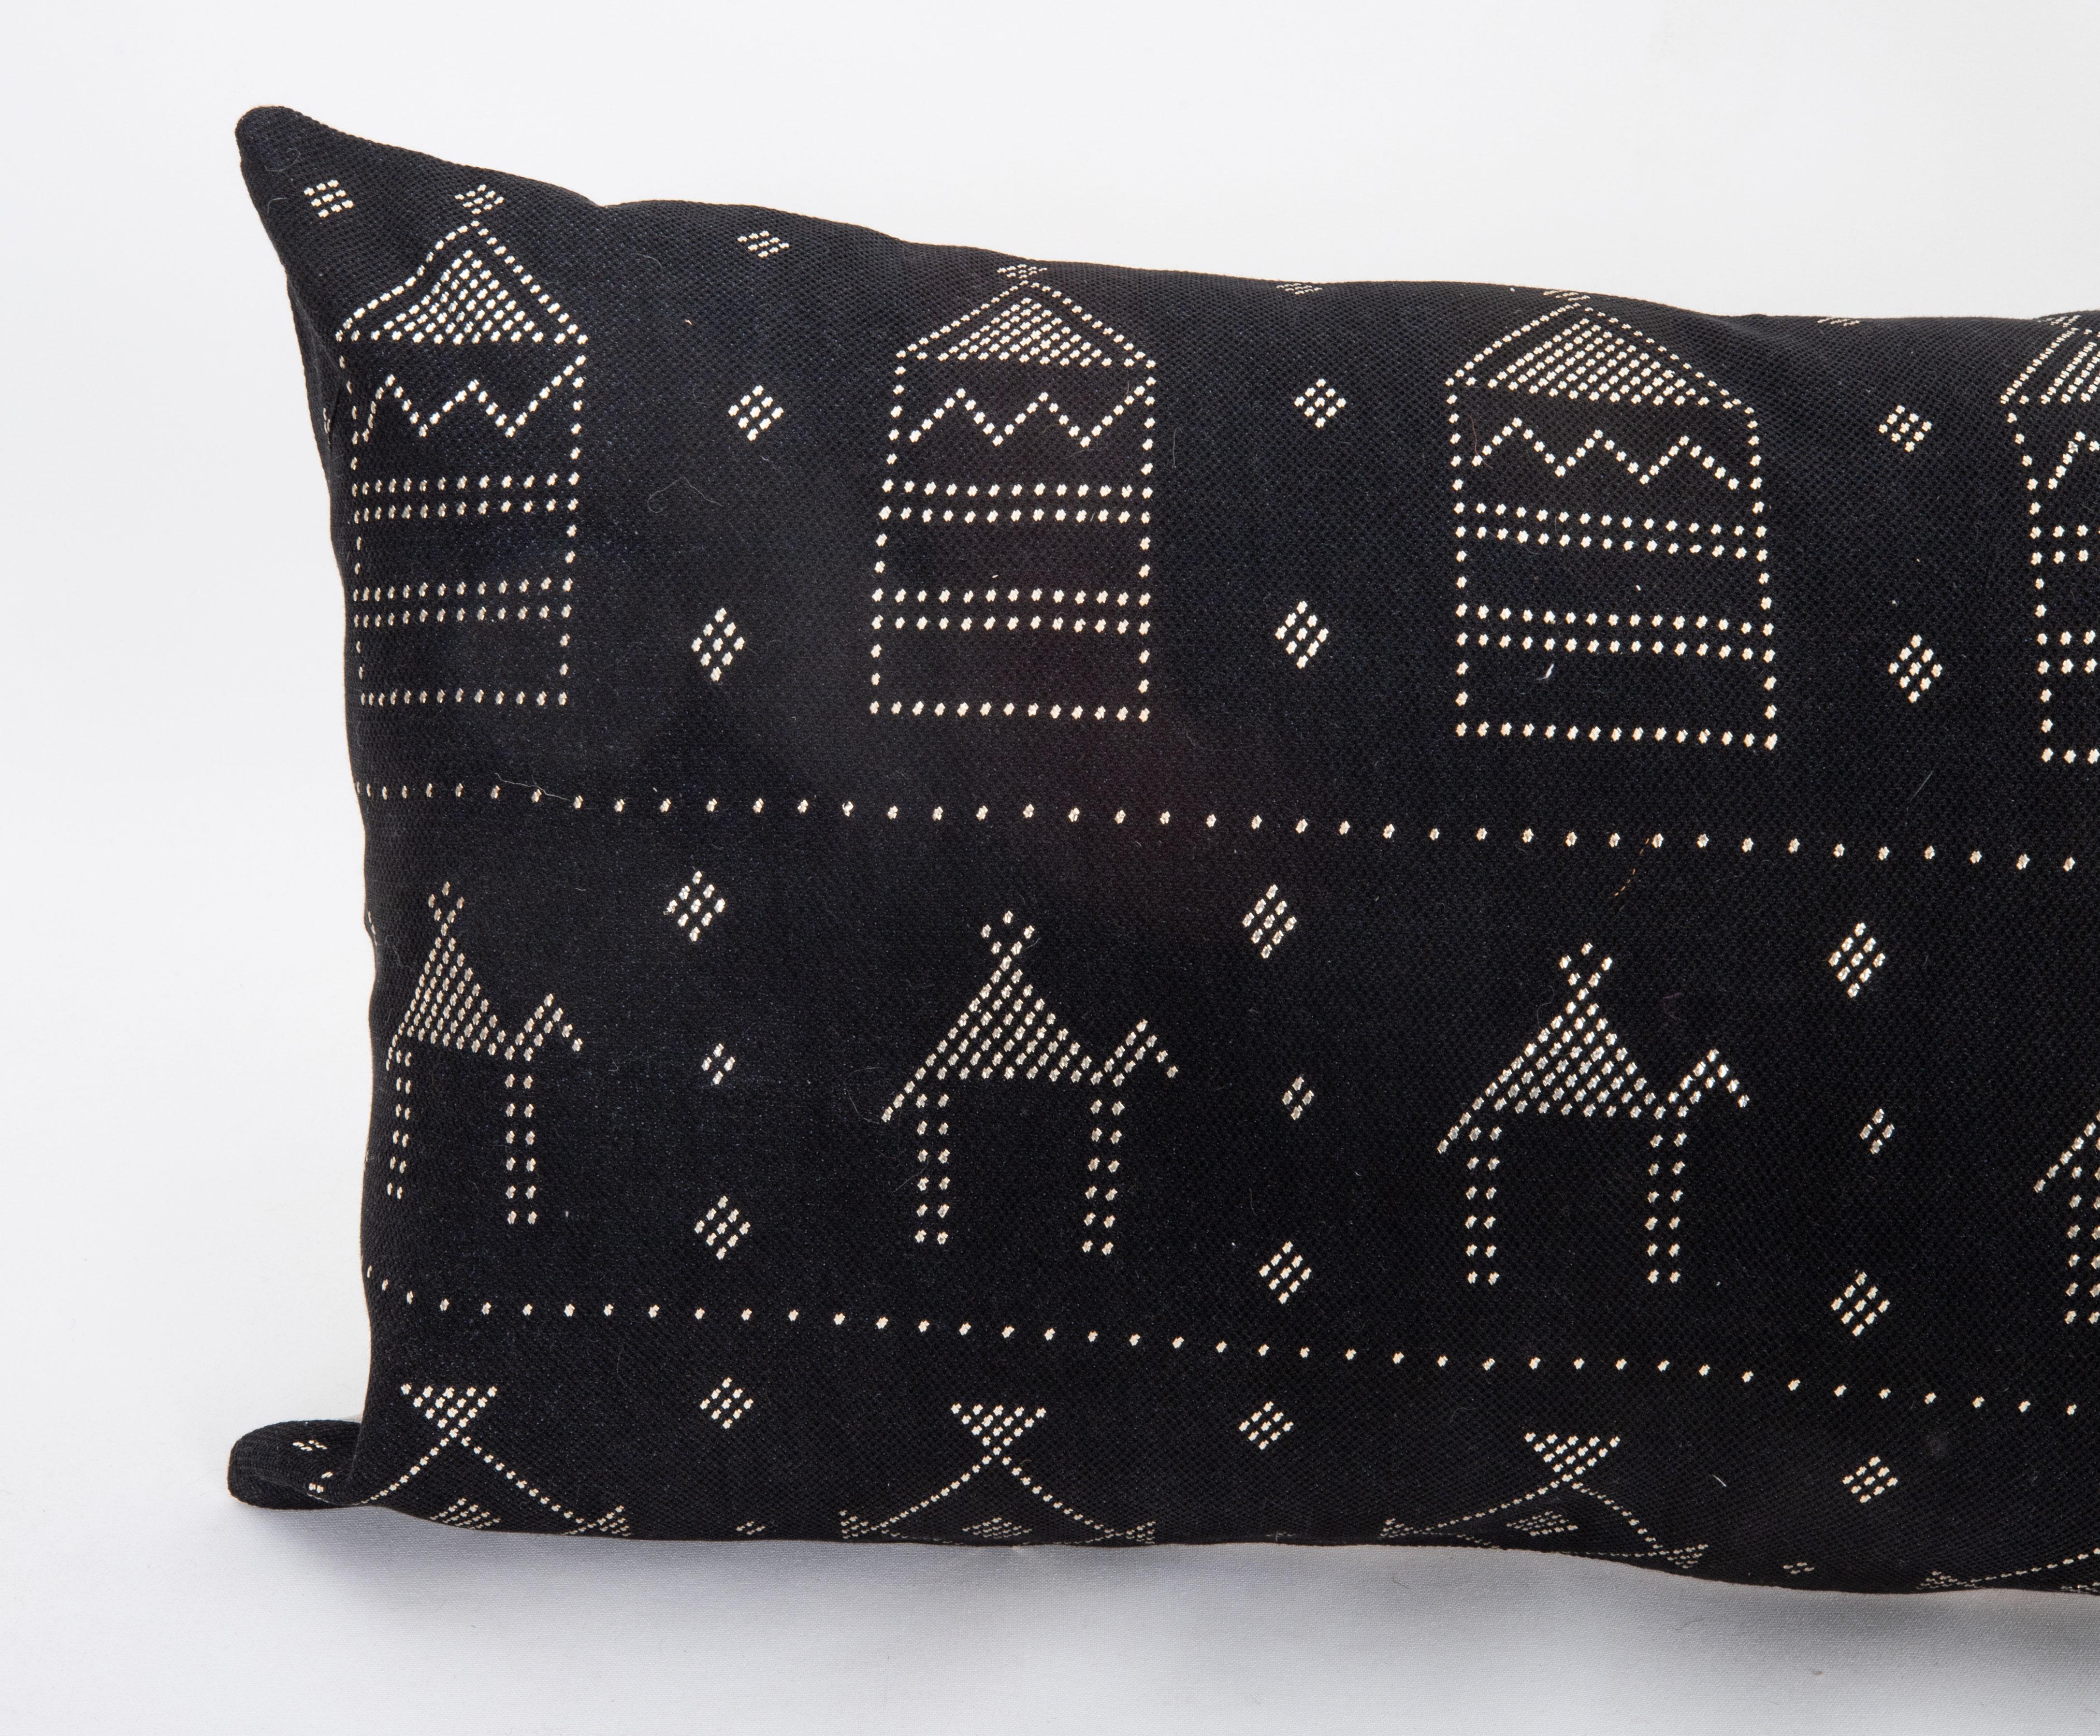 Embroidered Pillow Cover Fashioned from  Vintage Egyptian ‘tulli bi telli’, Assuit Textile For Sale